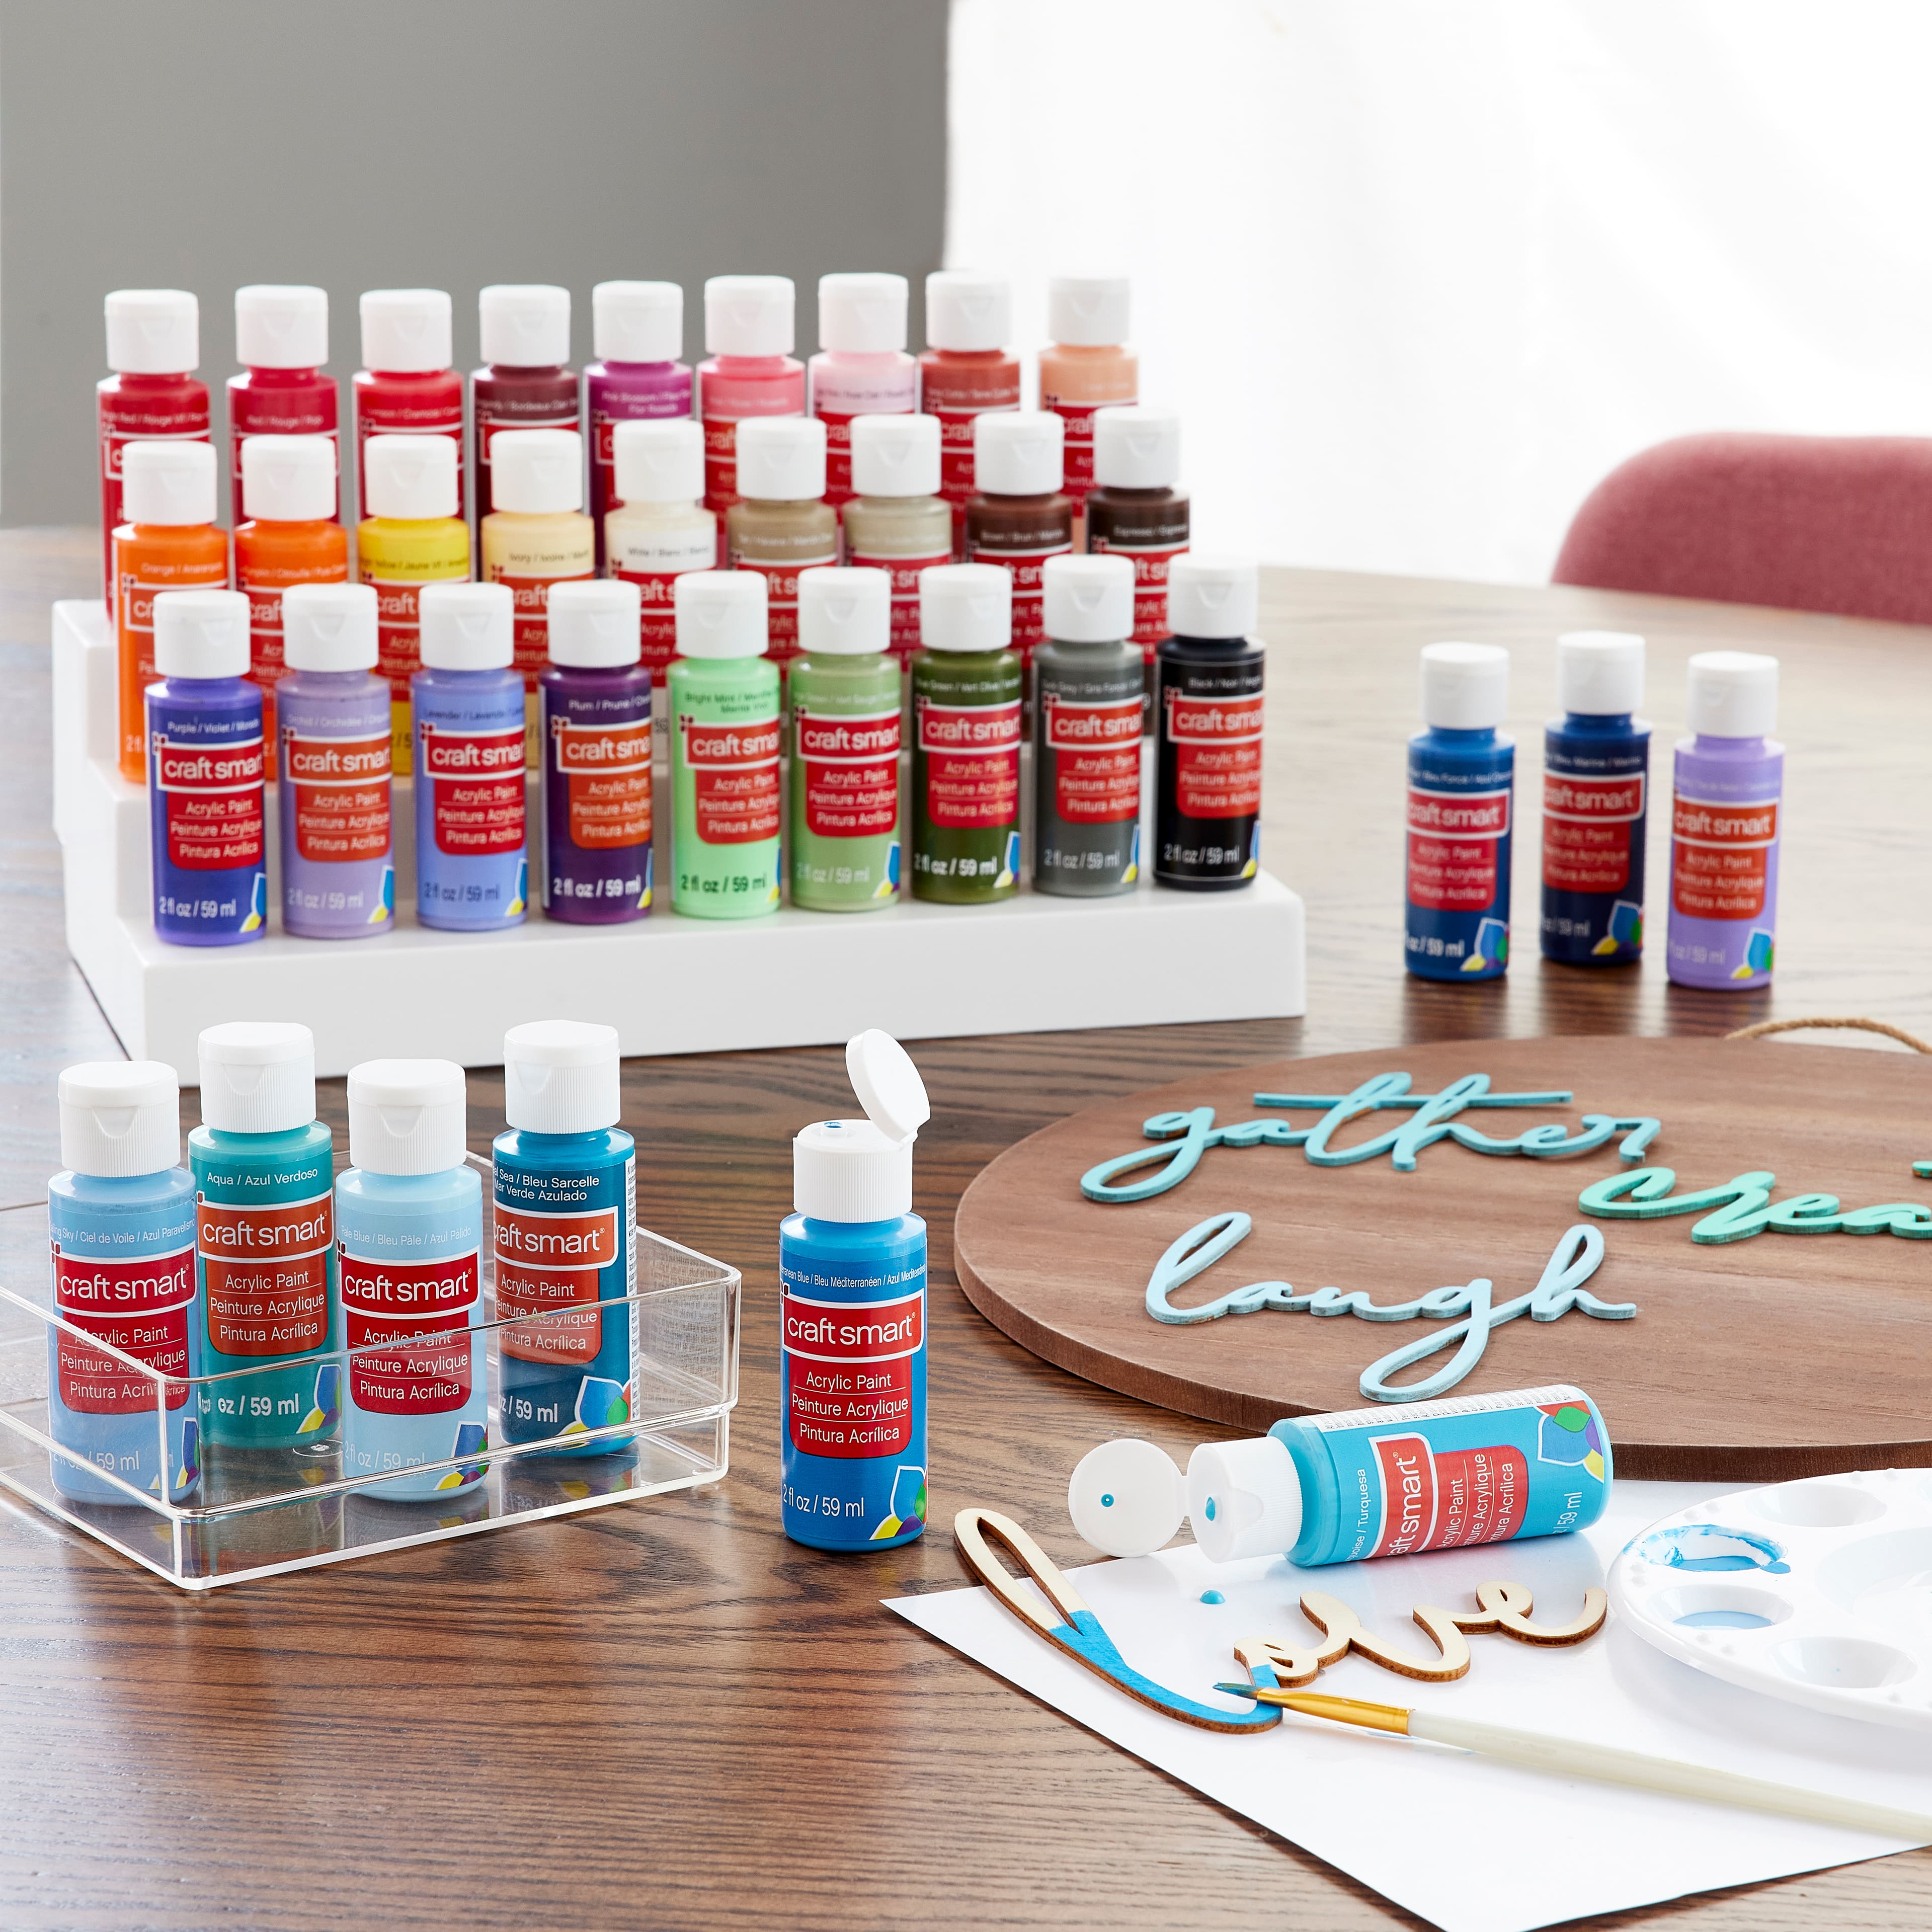 36 Color Acrylic Paint Value Set by Craft Smart&#xAE;